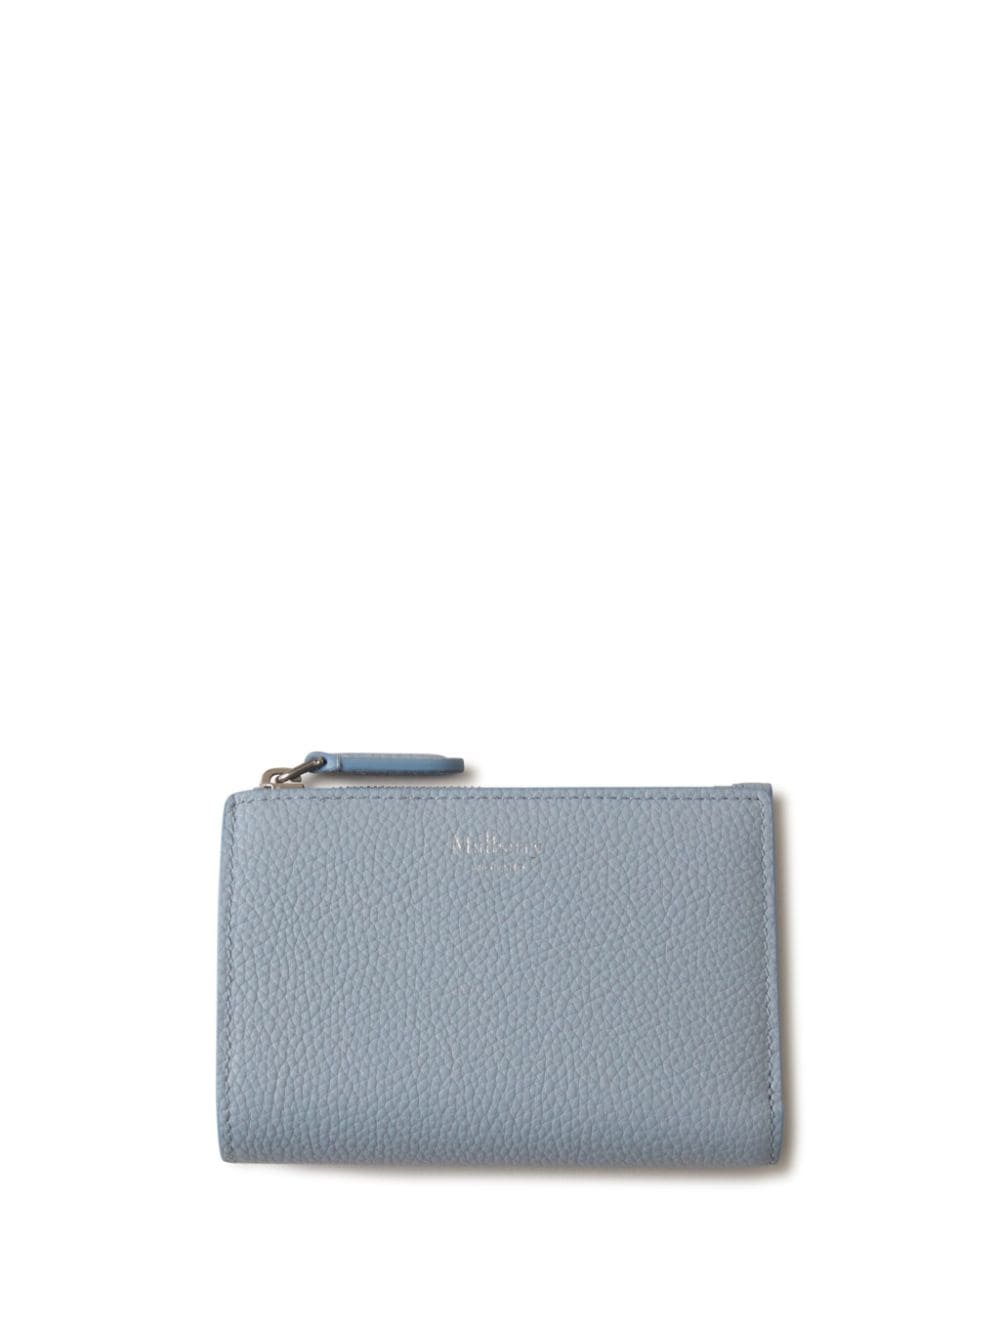 Mulberry Continental Bi-fold Leather Wallet In Blue